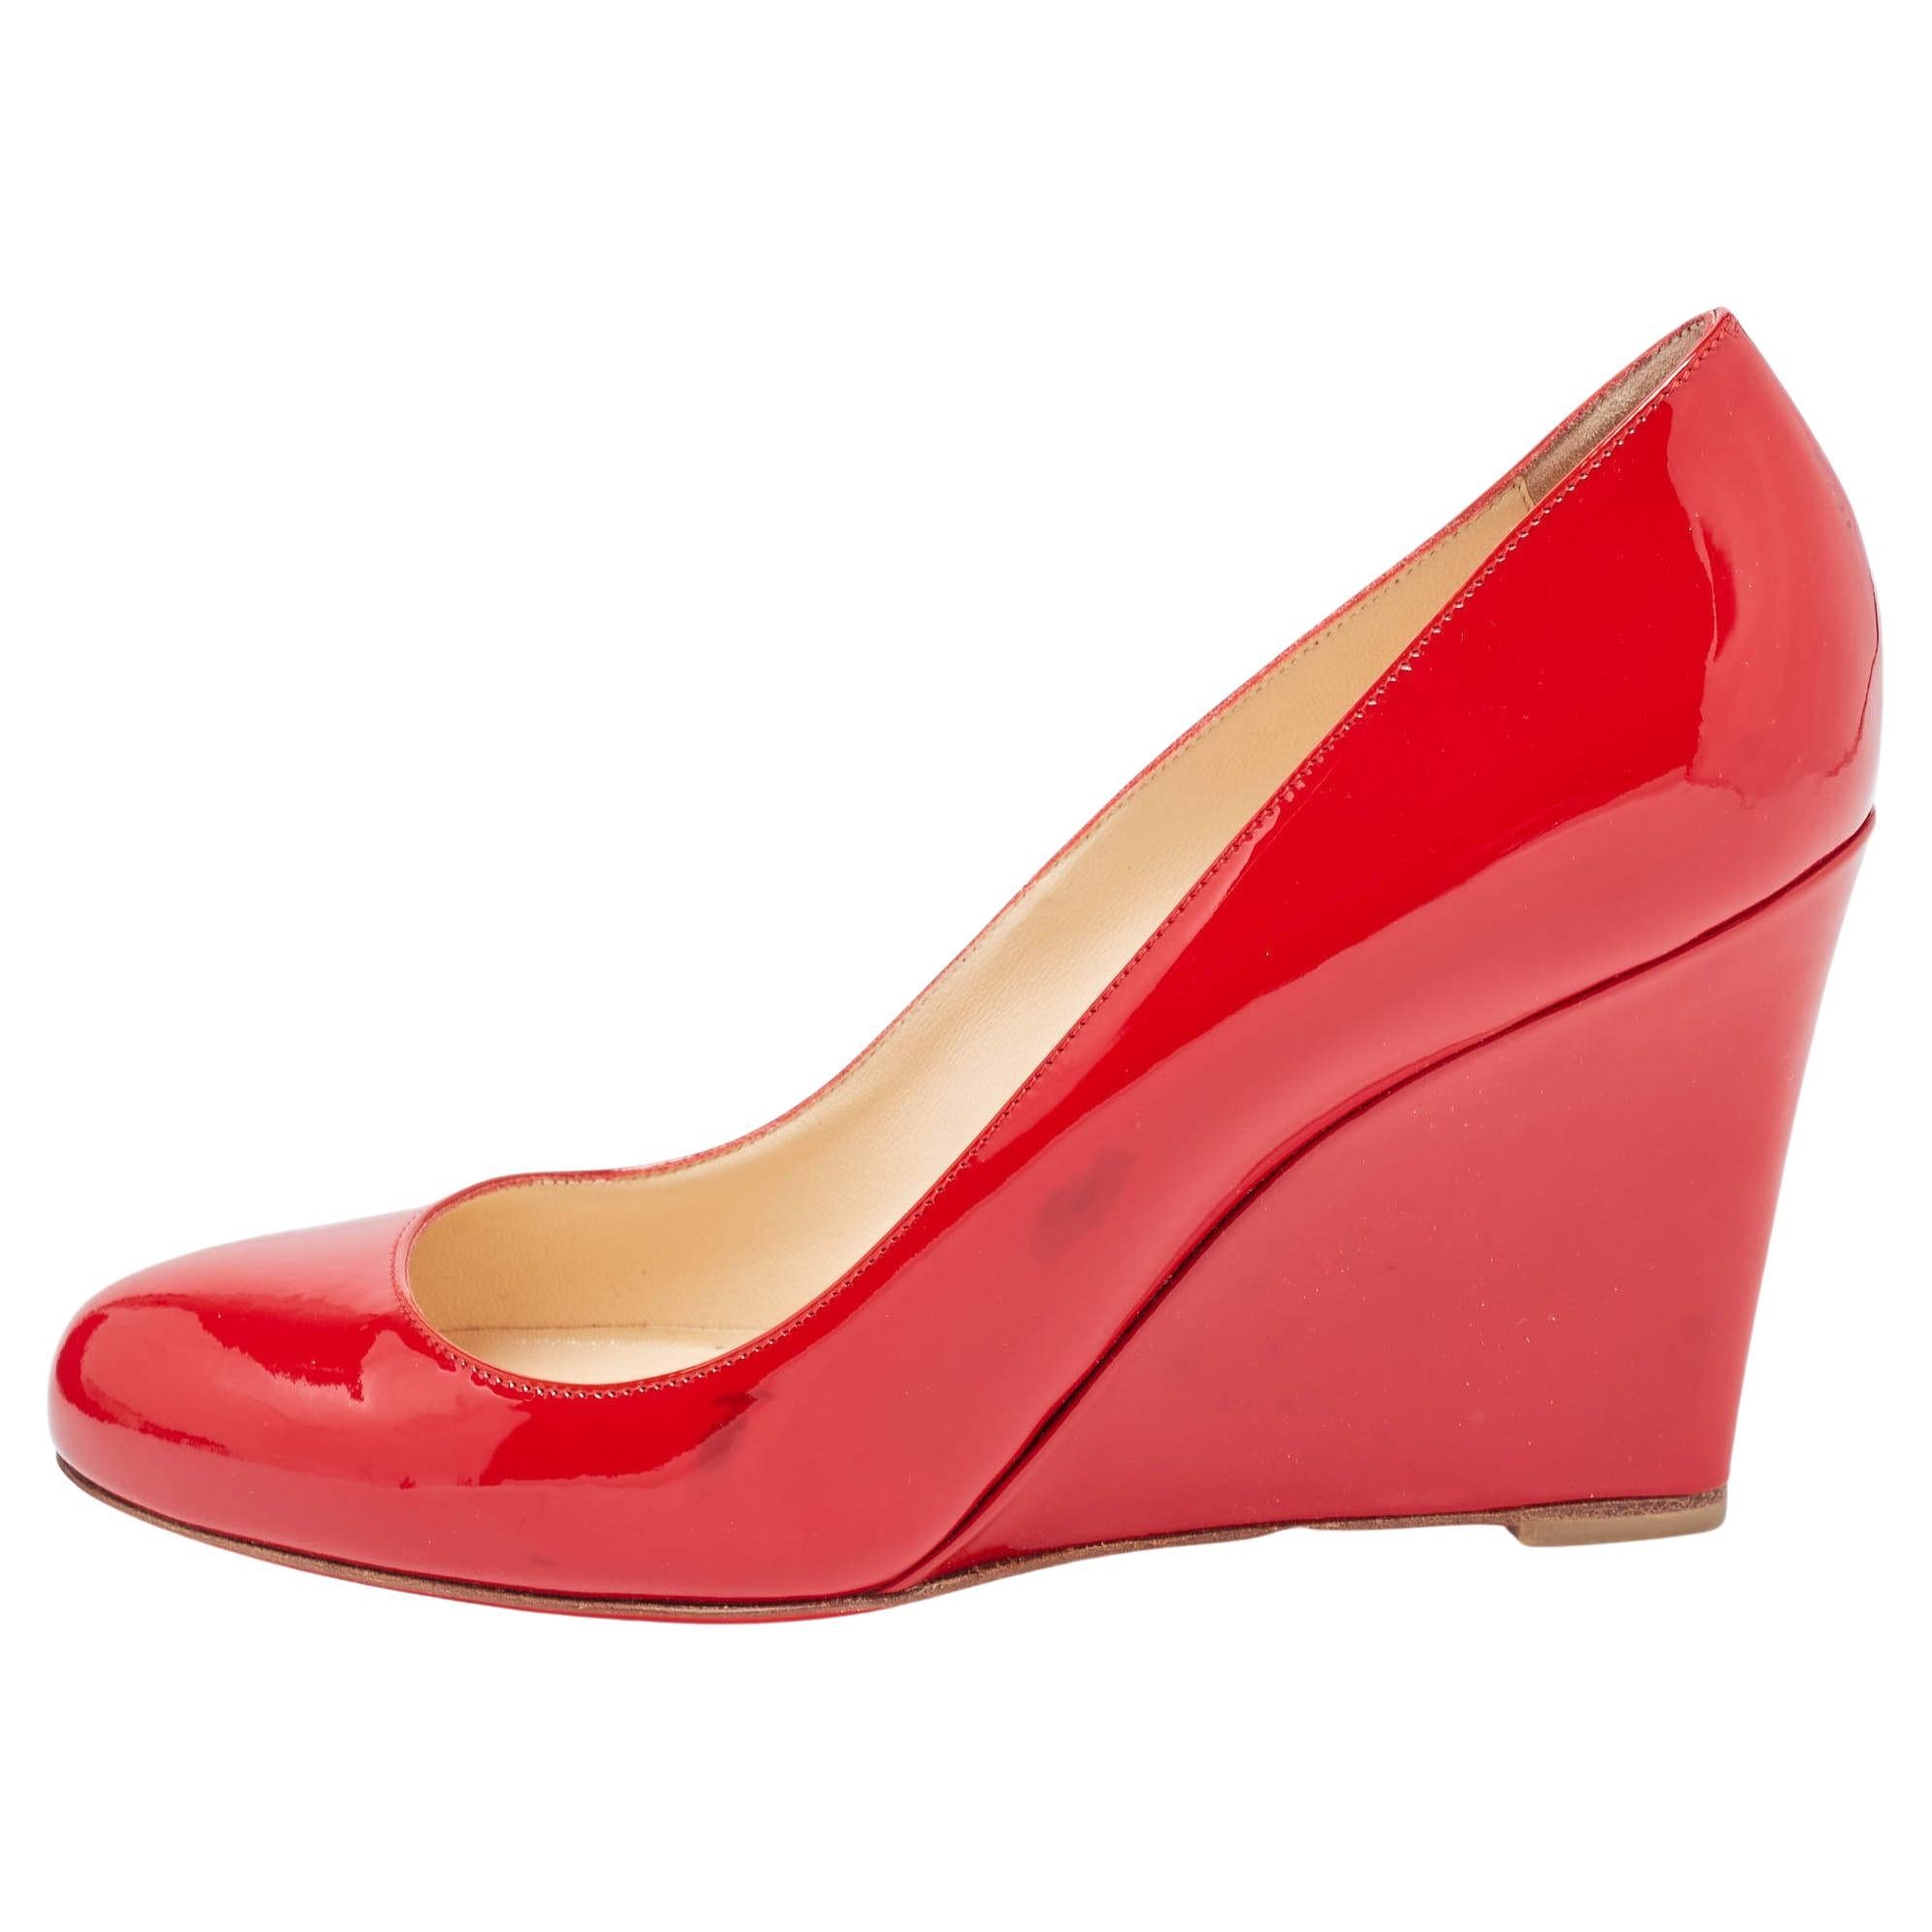 Christian Louboutin Red Patent Leather Ron Ron Wedge Pumps Size 38.5 For Sale